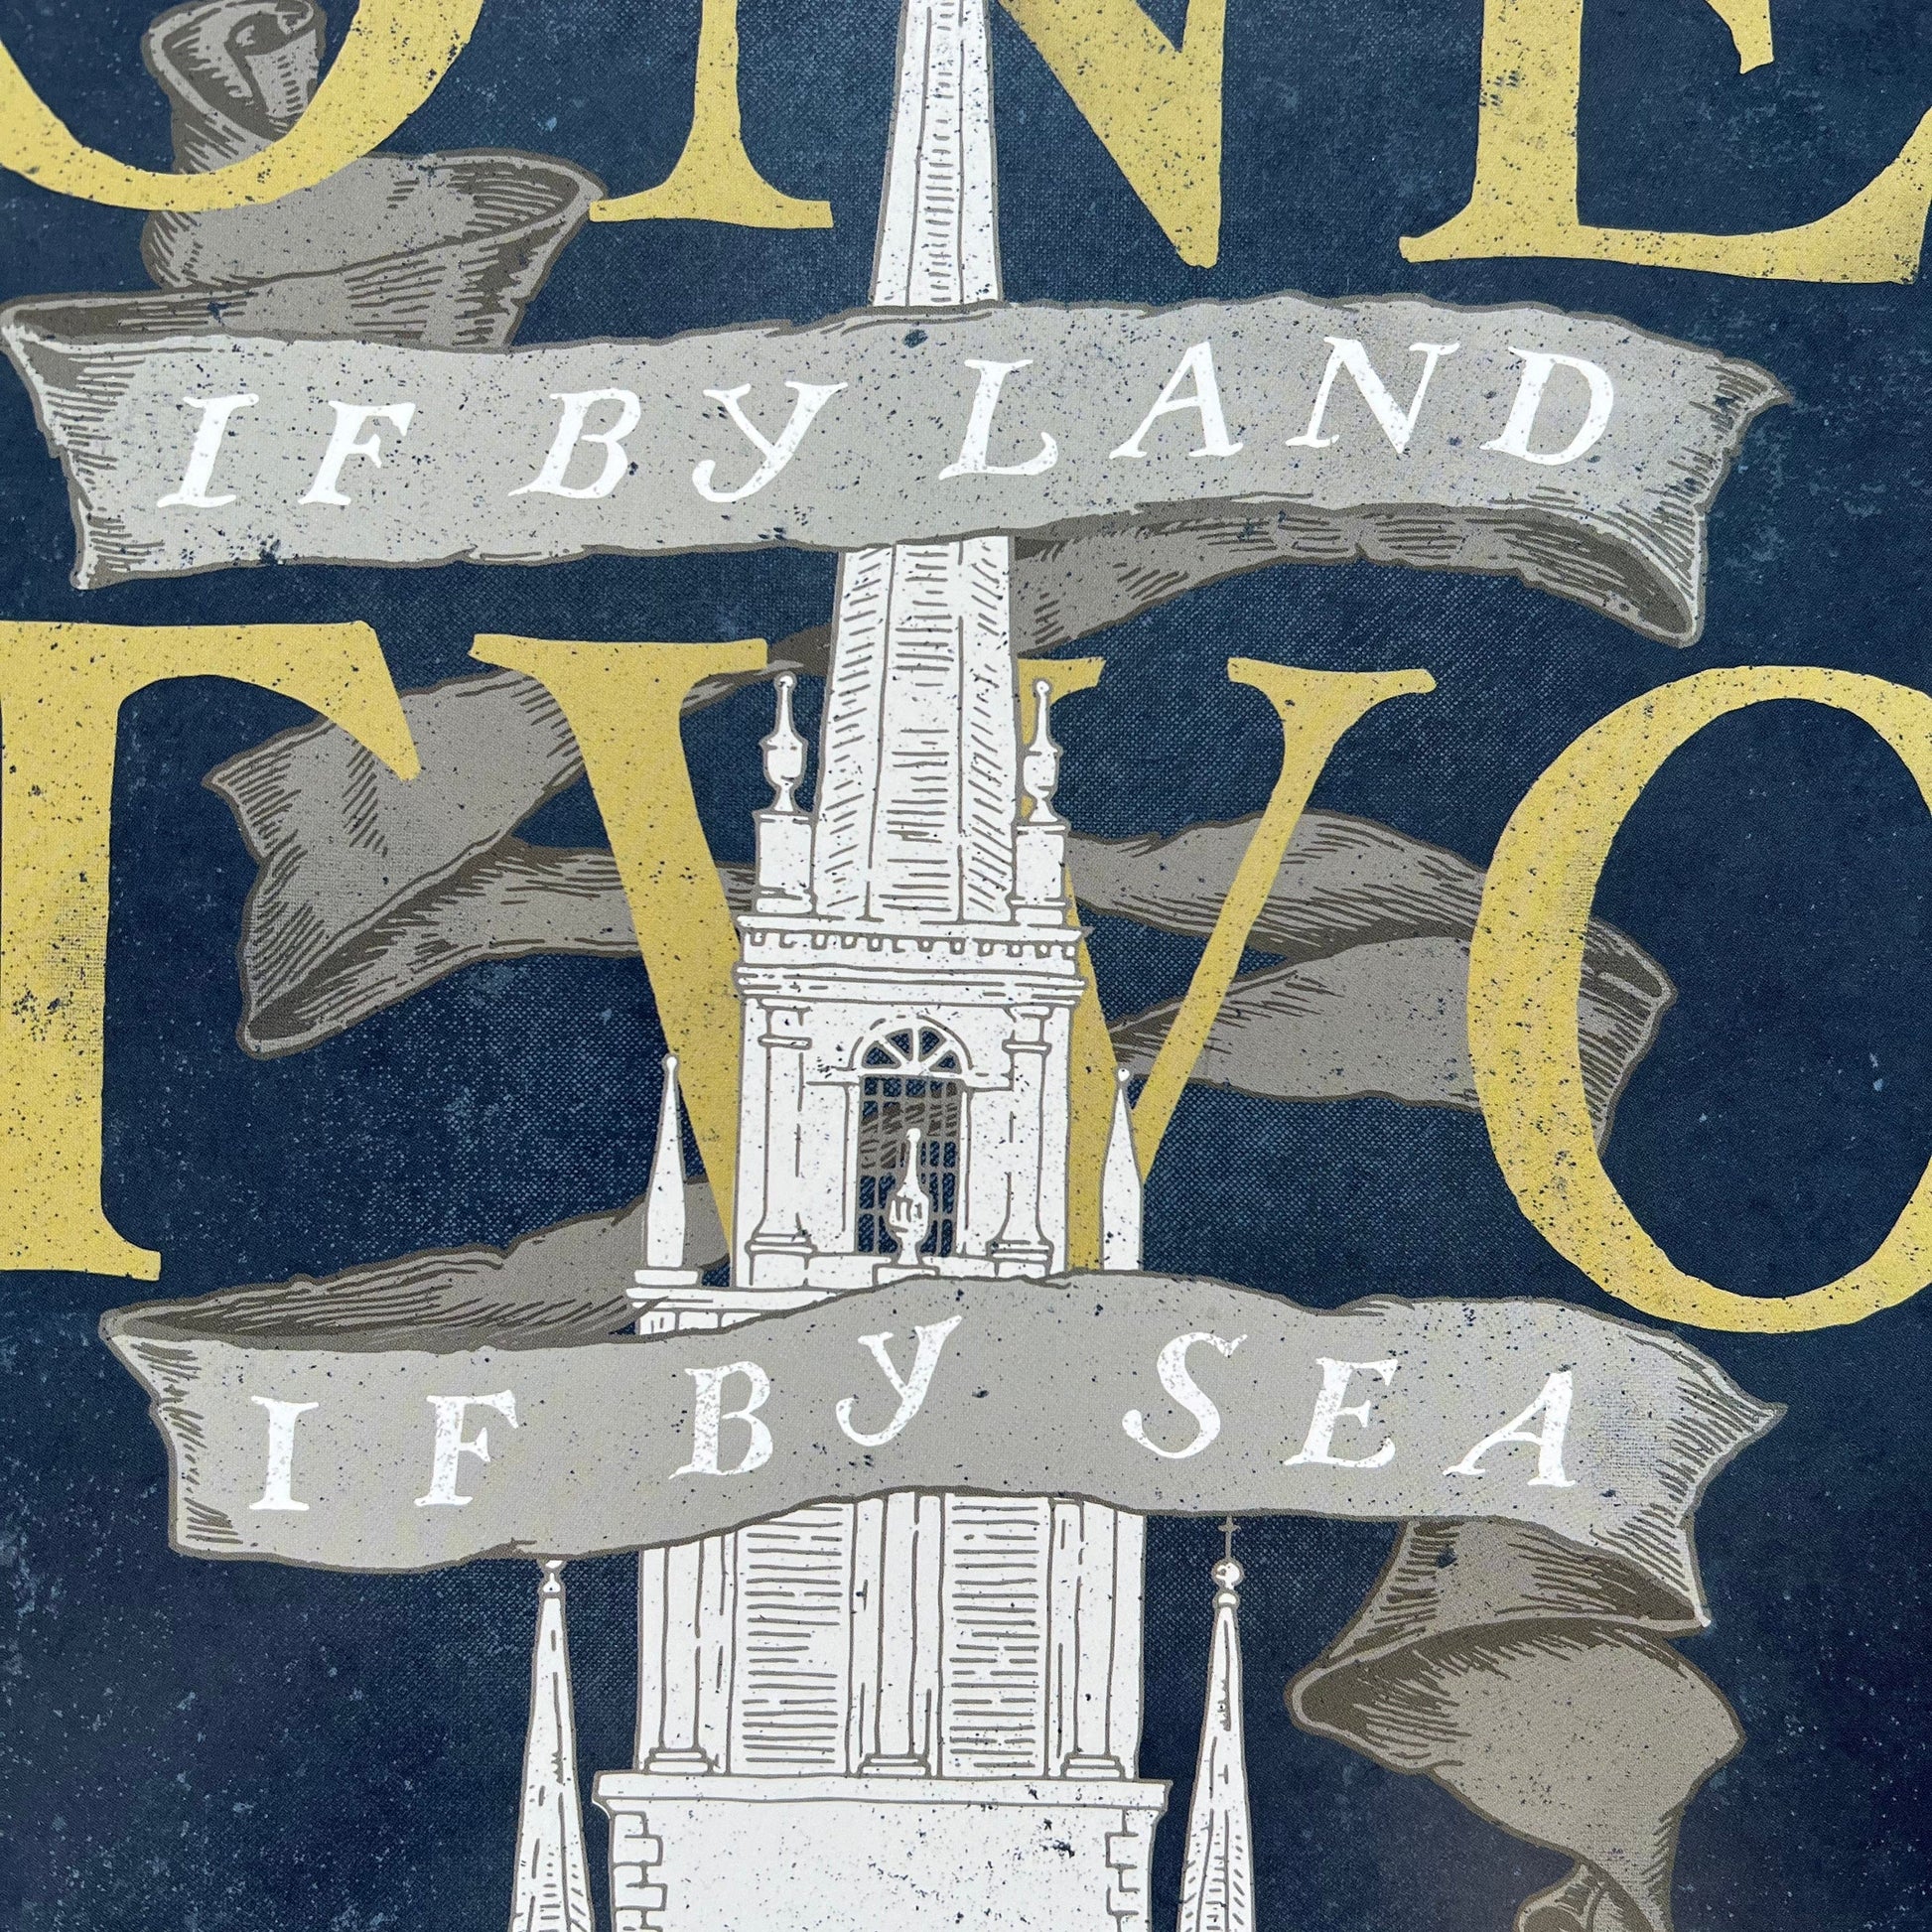 Close-up of "One if by land . . ." as a small poster from The History List store